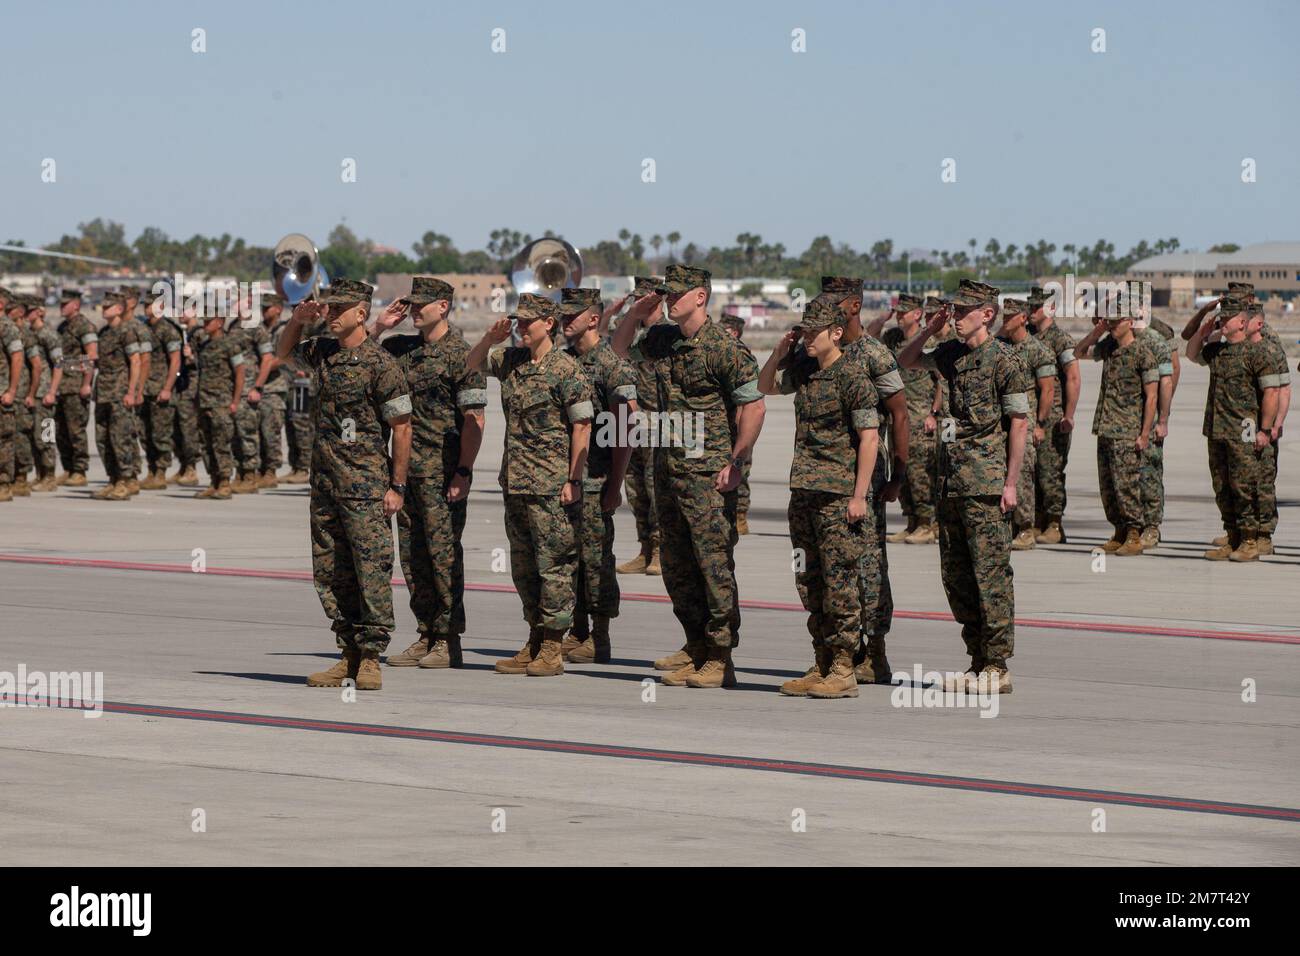 U.S. Marines assigned to Marine Aviation Weapons and Tactics Squadron One (MAWTS-1), salute the incoming commanding officer of MAWTS-1, Col. Eric D. Purcell, during the Change of Command Ceremony at Marine Corps Air Station Yuma, Arizona, on May 12, 2022. The MAWTS-1 Change of Command Ceremony marked the official passing of authority from the outgoing commanding officer, Col. Steve E. Gillette, to the incoming commanding officer, Col. Eric D. Purcell. Stock Photo